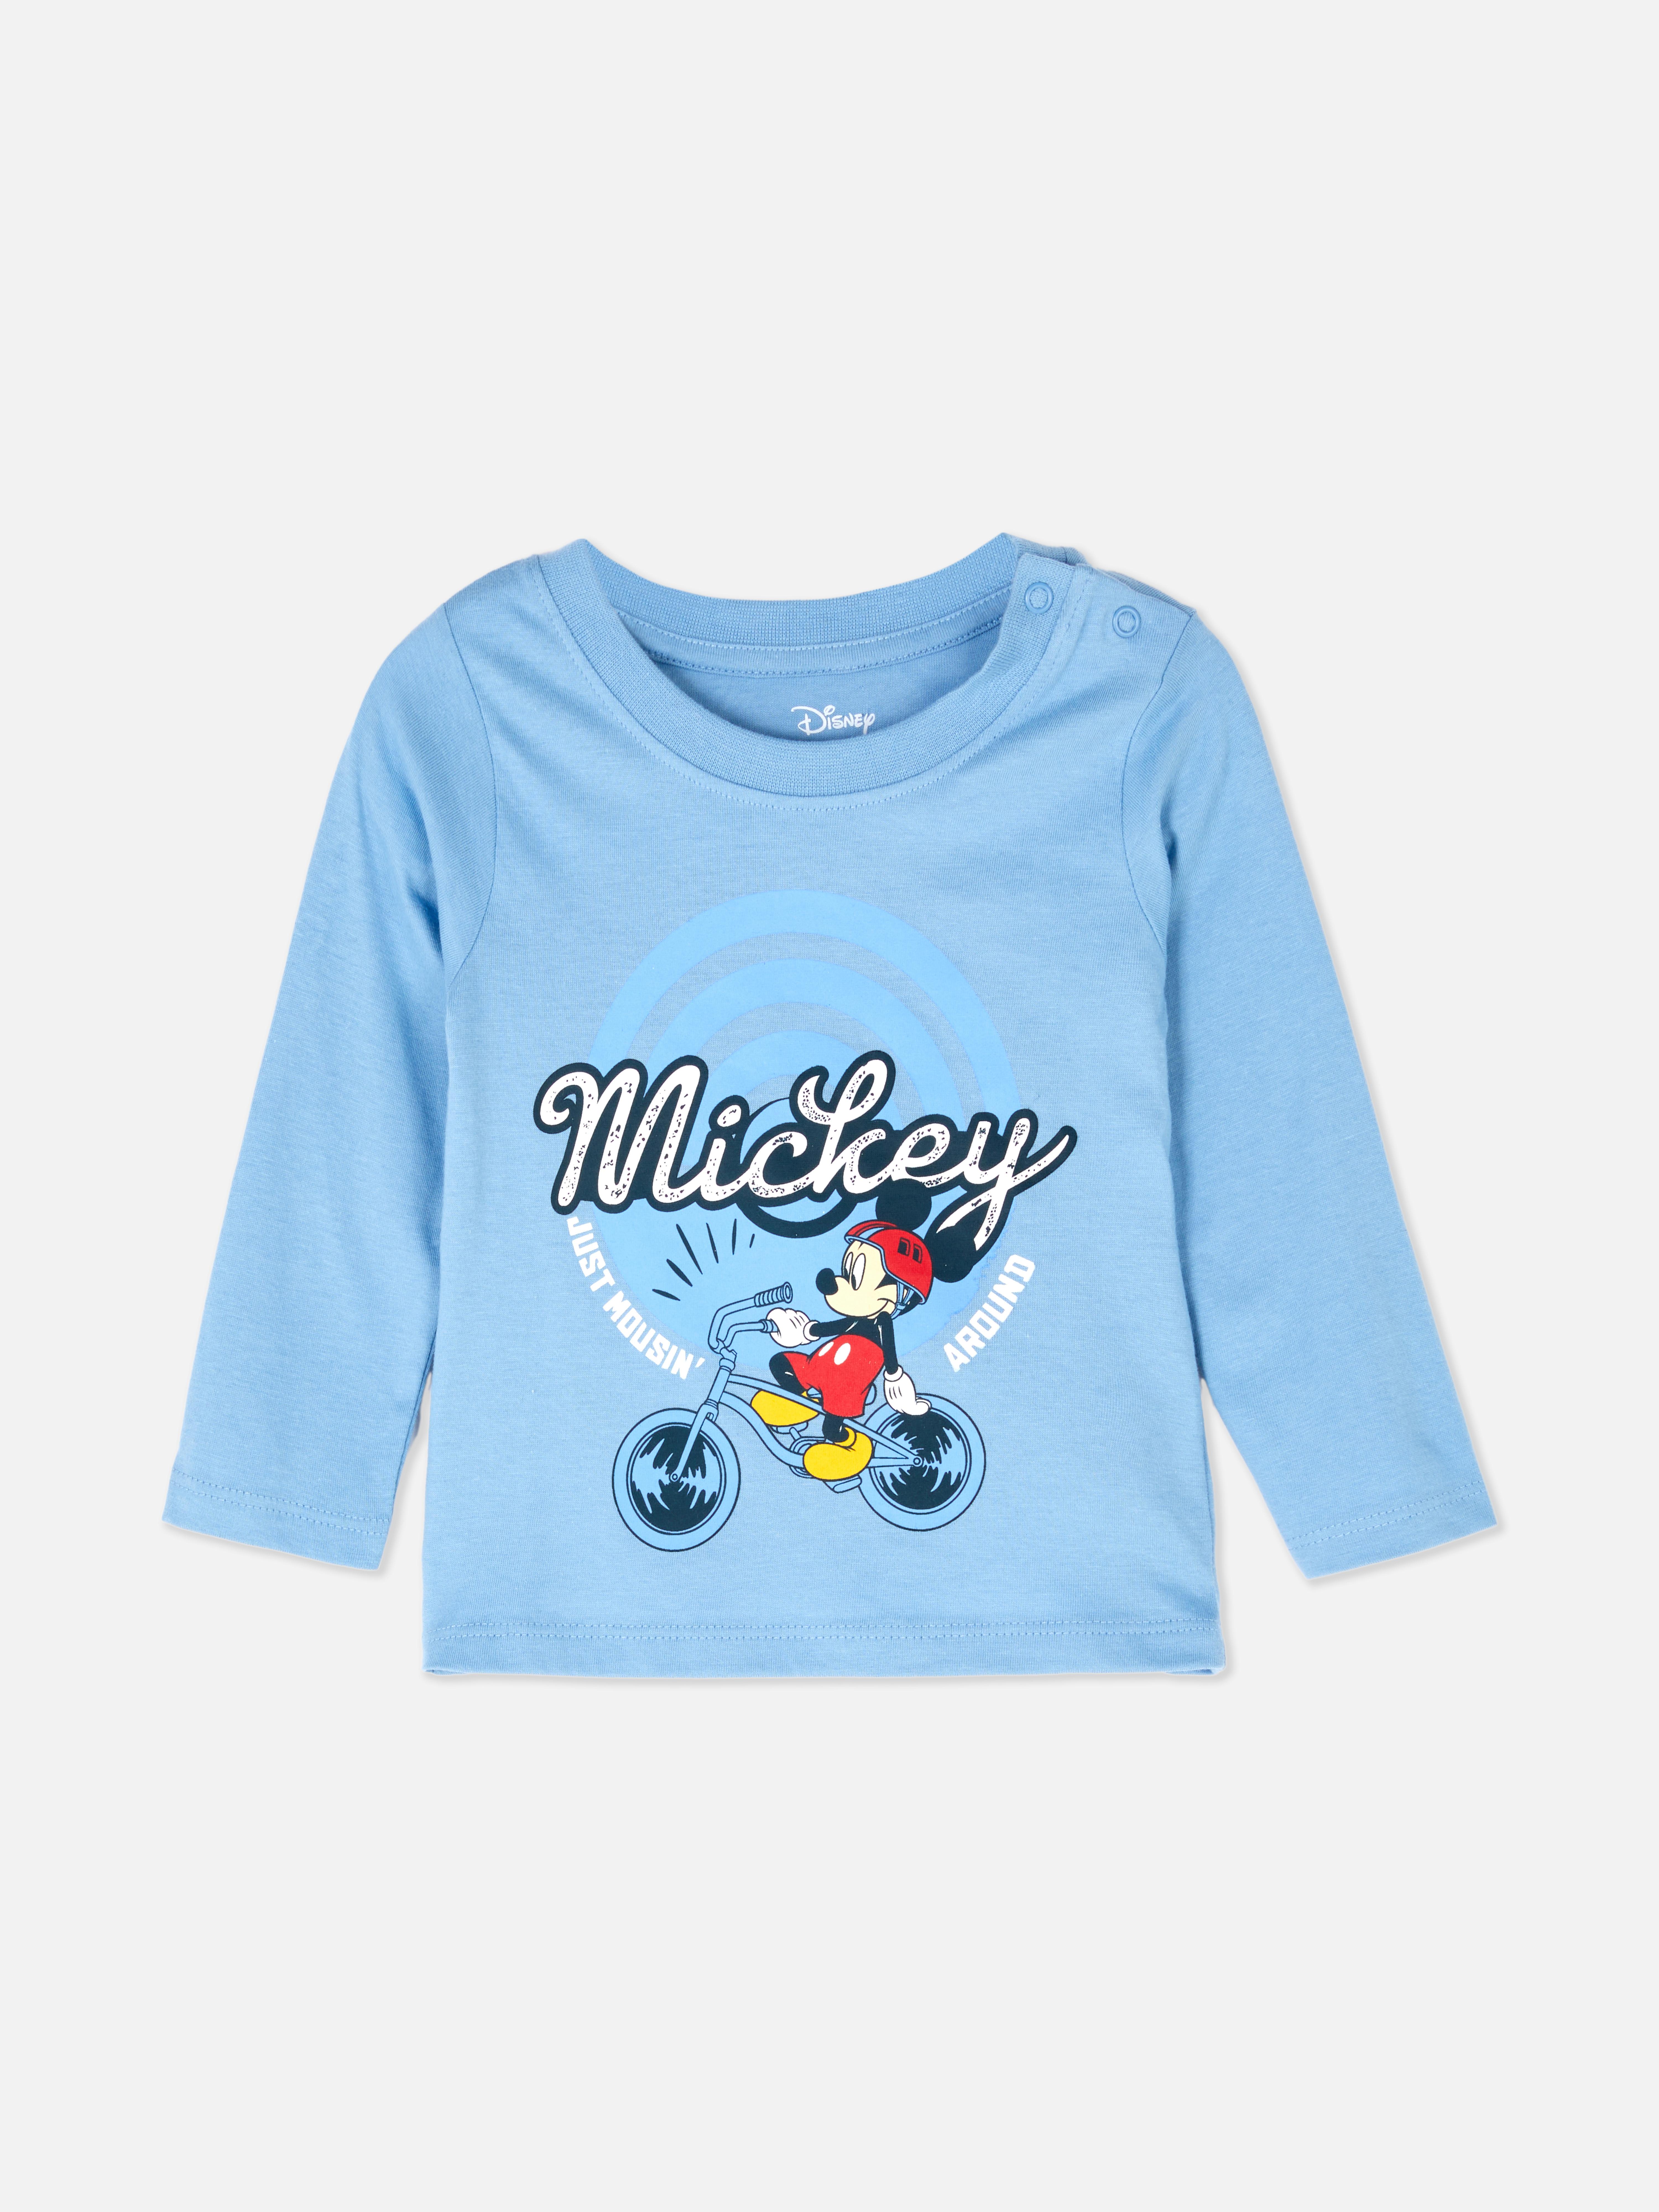 Disney’s Mickey Mouse Graphic T-shirt